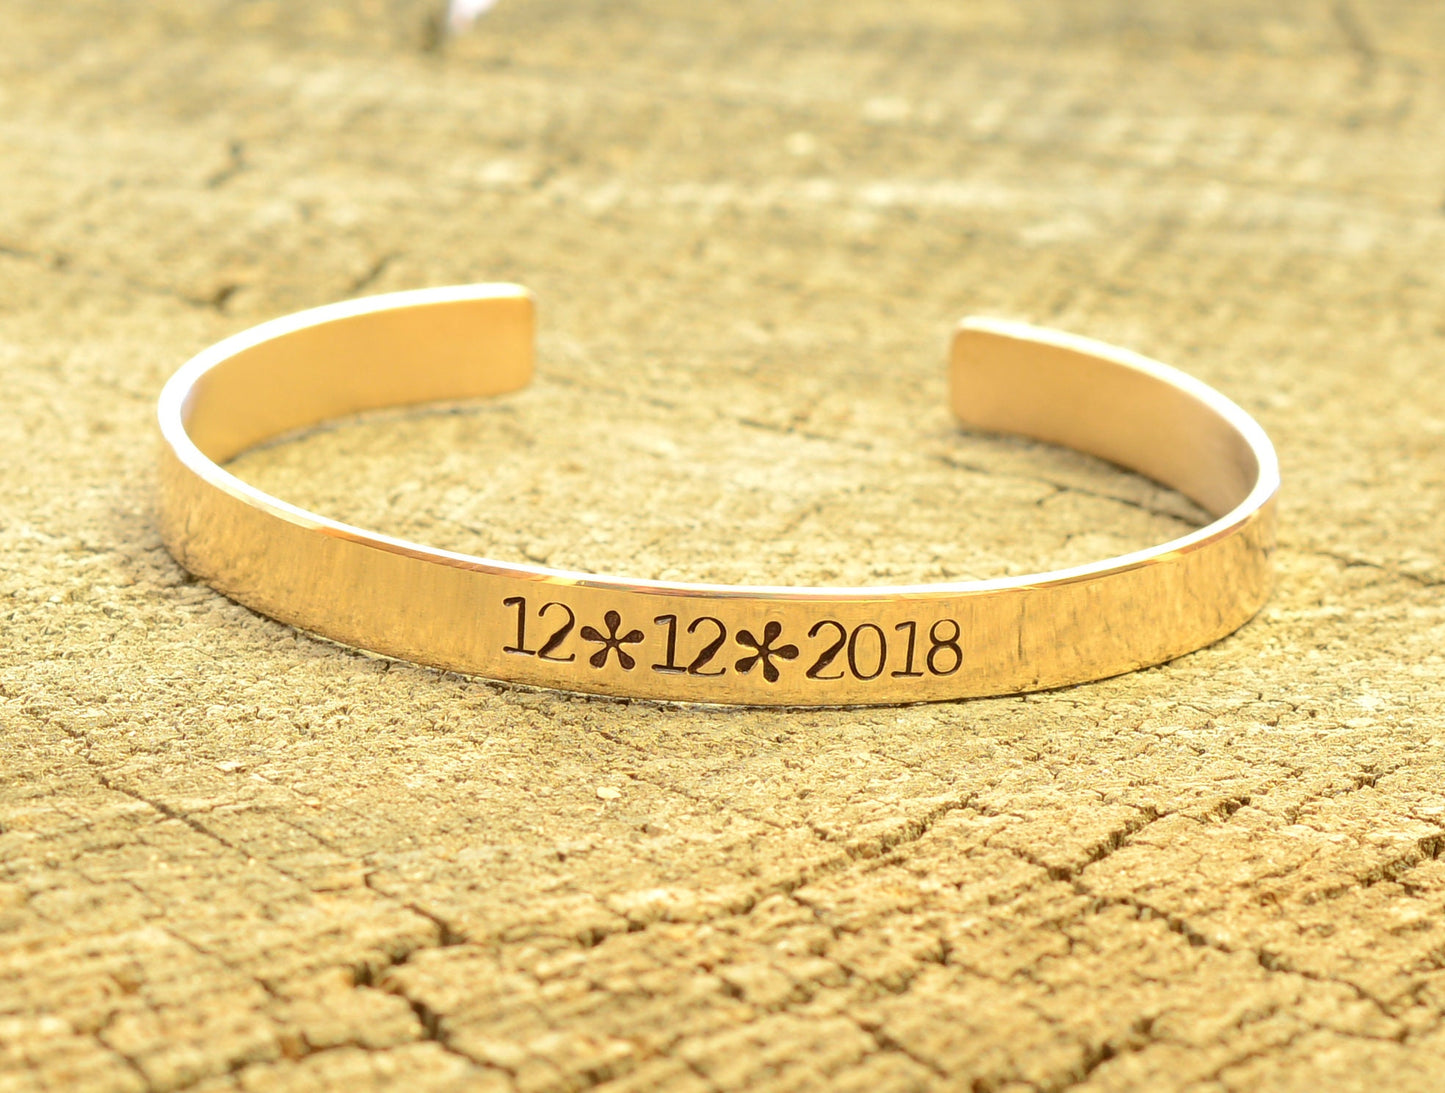 Bronze cuff bracelet for 8th anniversaries or custom messages